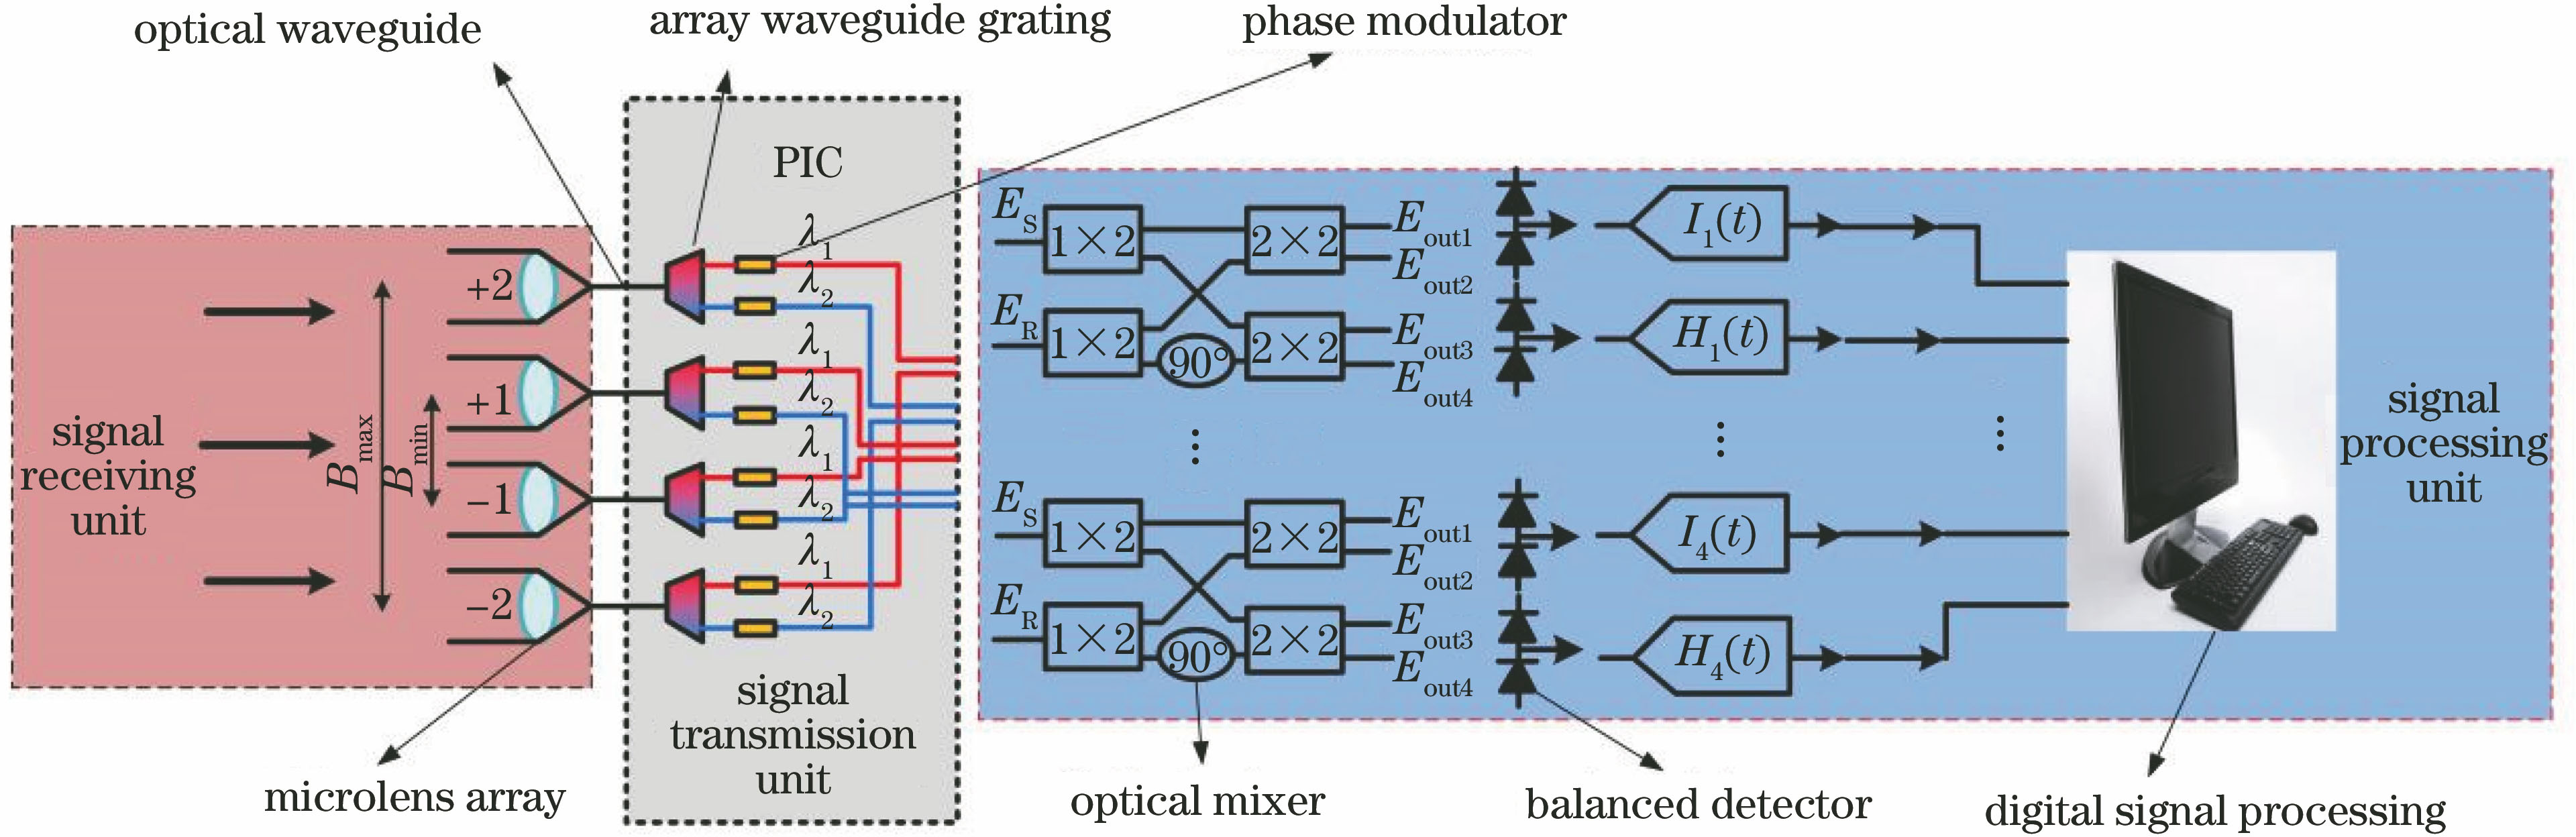 Schematic of photonic integrated interferometric imaging system